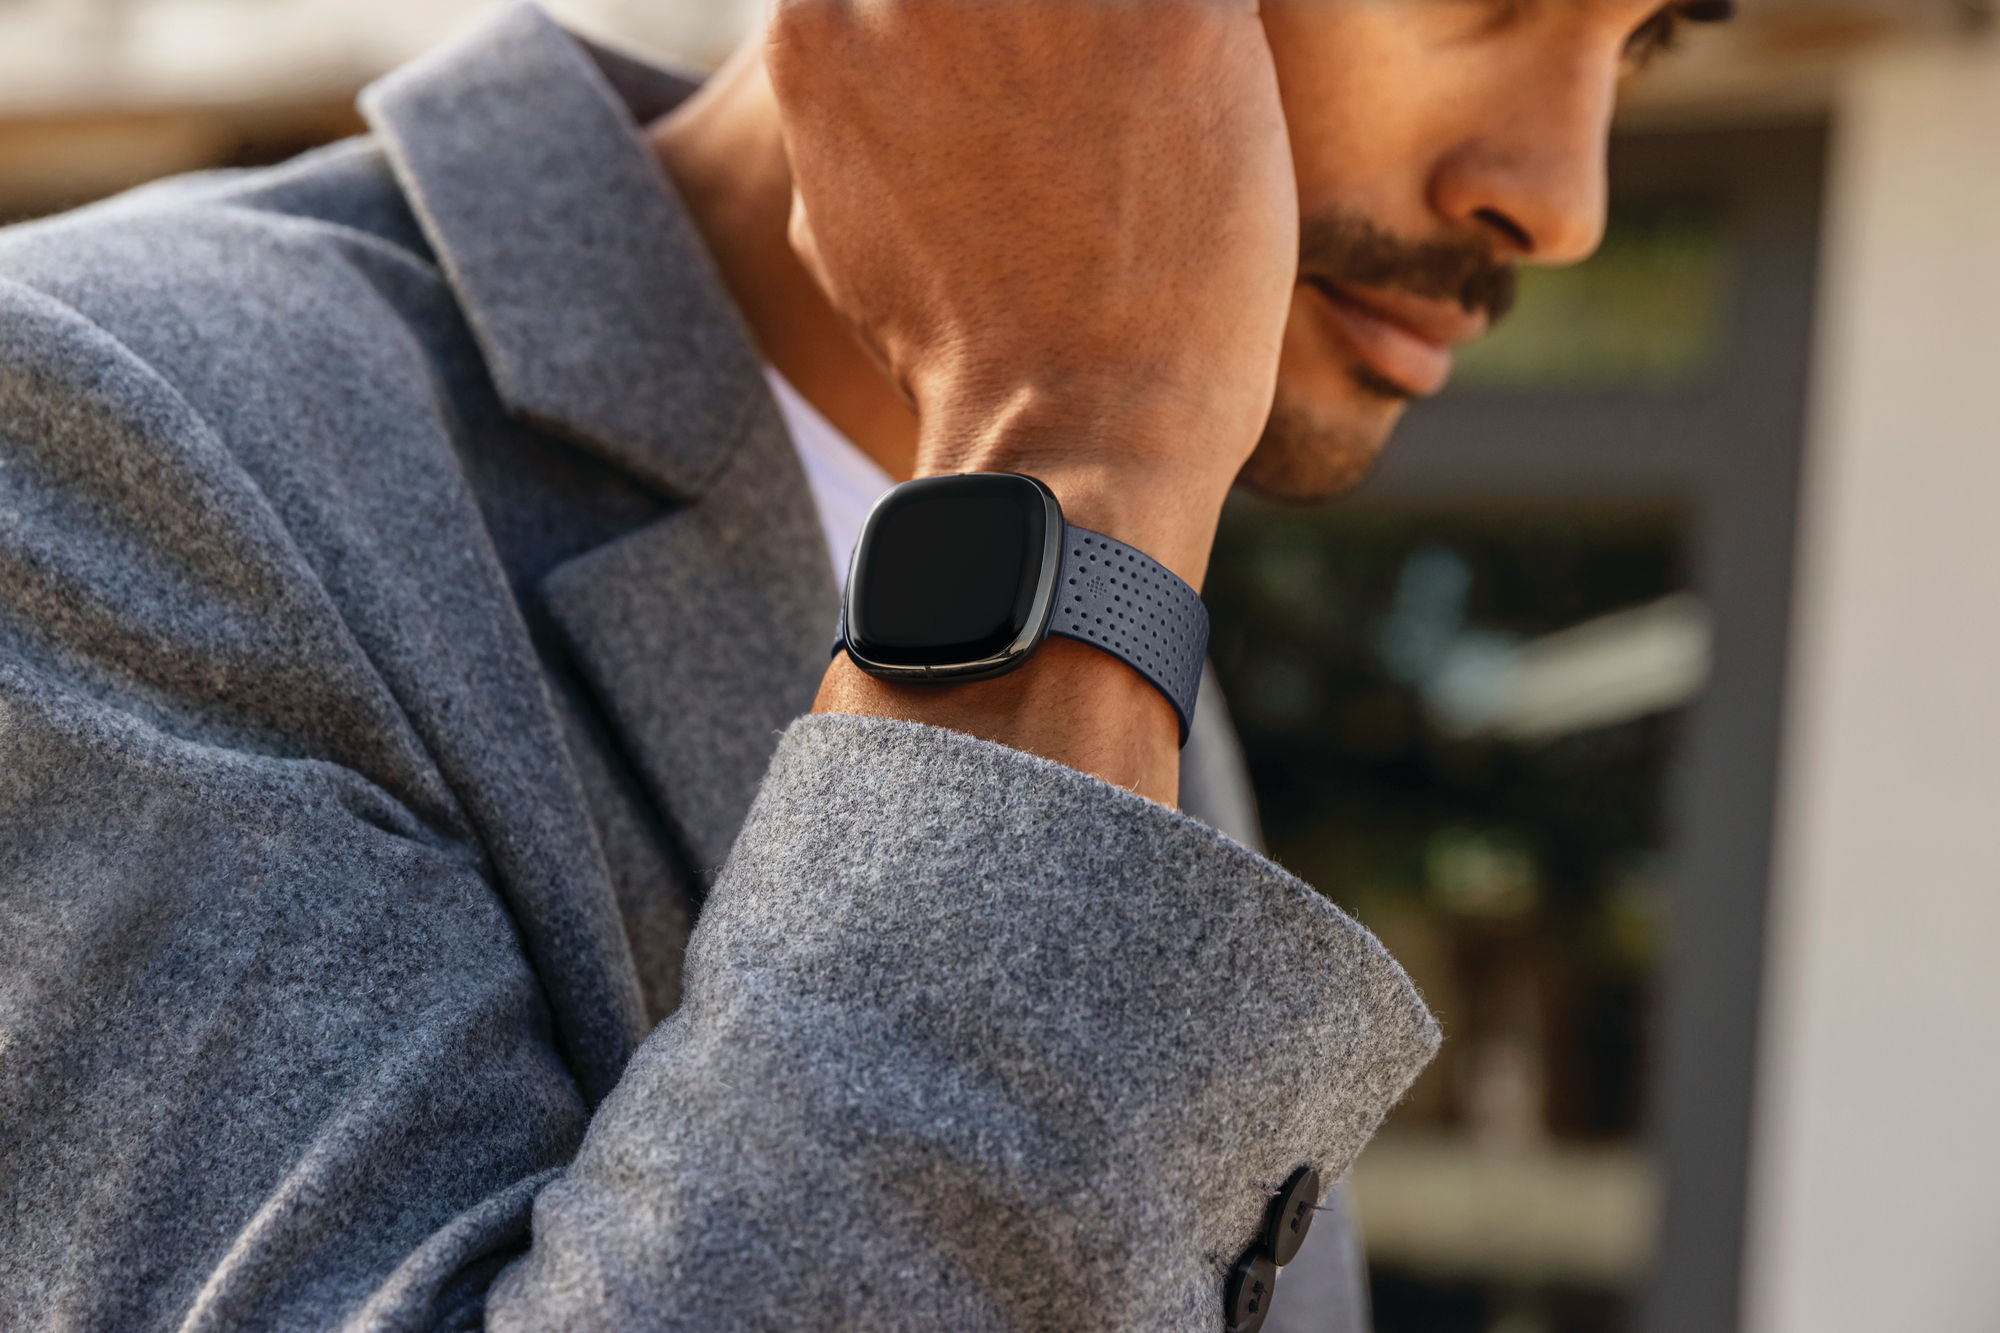 Fitbit Debuts World's first with EDA Sensor for Stress Management, App, SpO2 and Skin Temperature Sensors